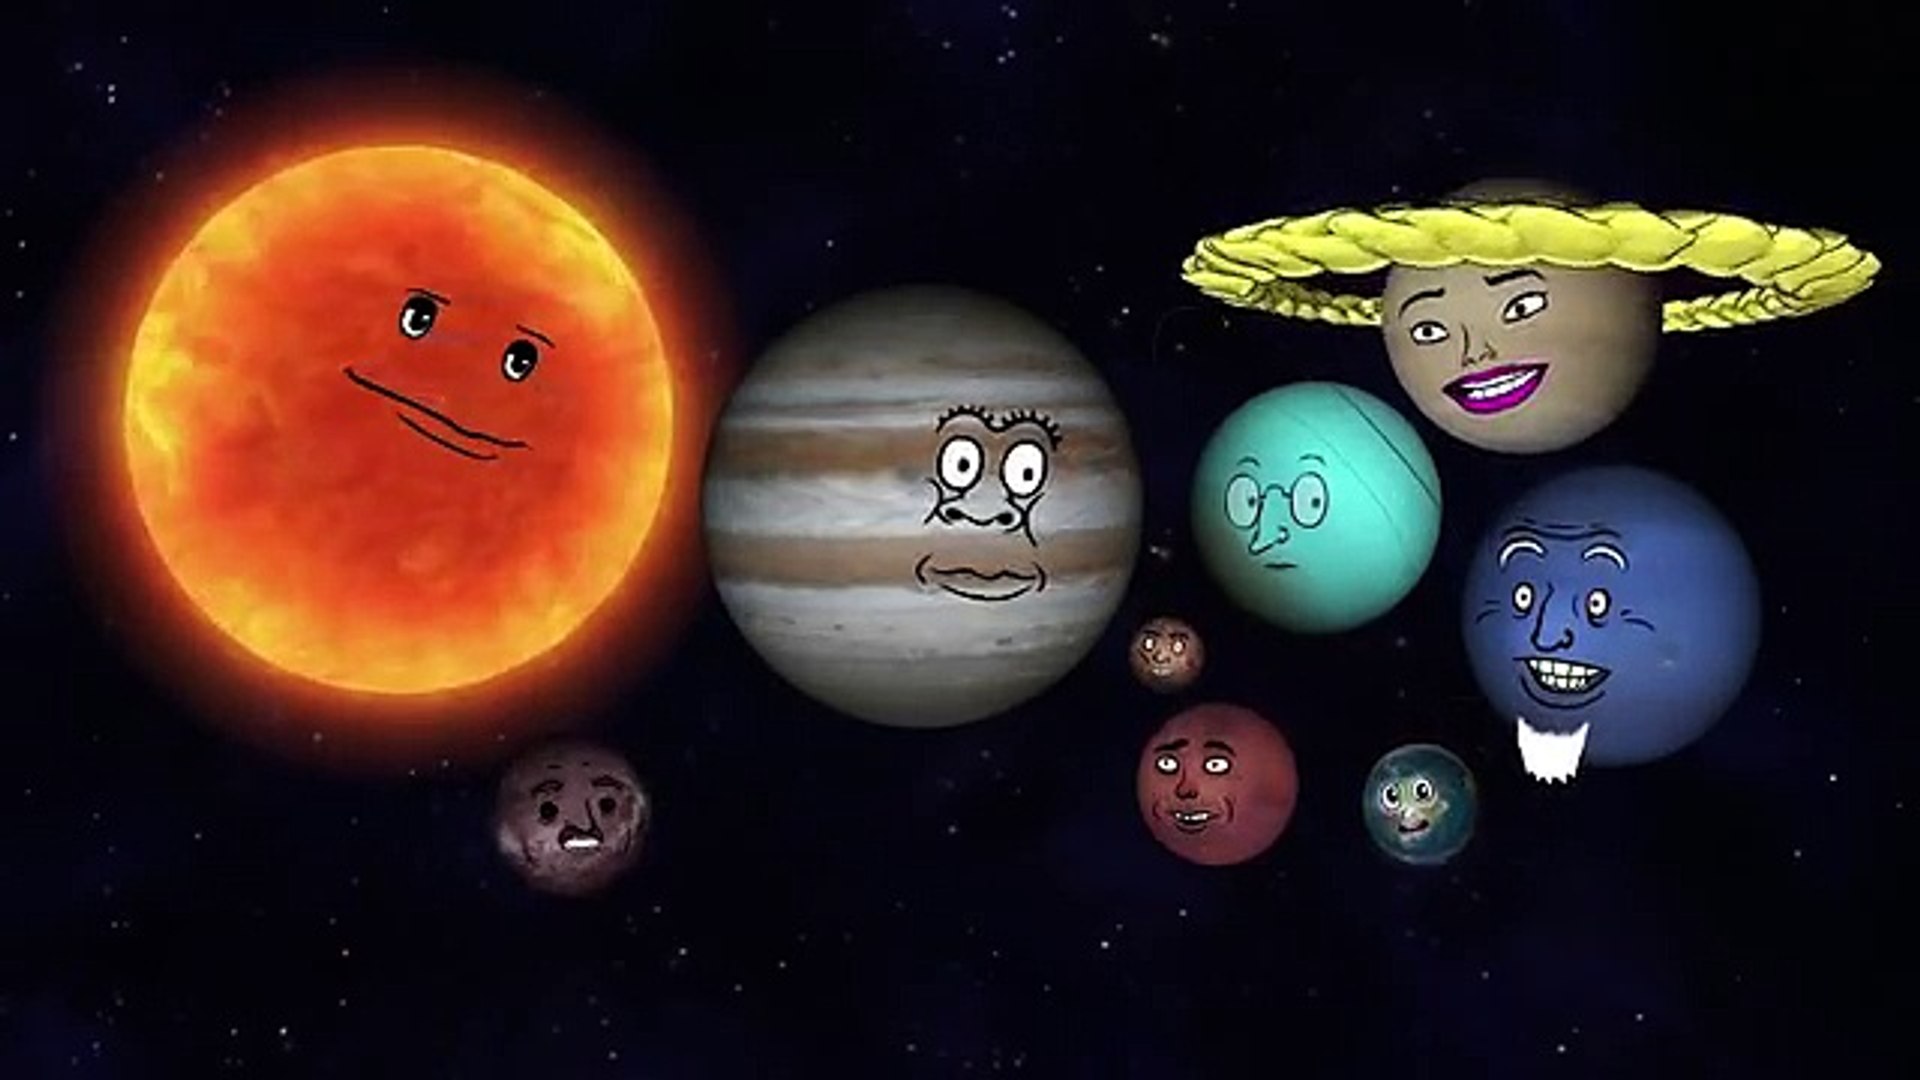 JUPITER GOES TO A SPA (Planets #19) - Dailymotion Video